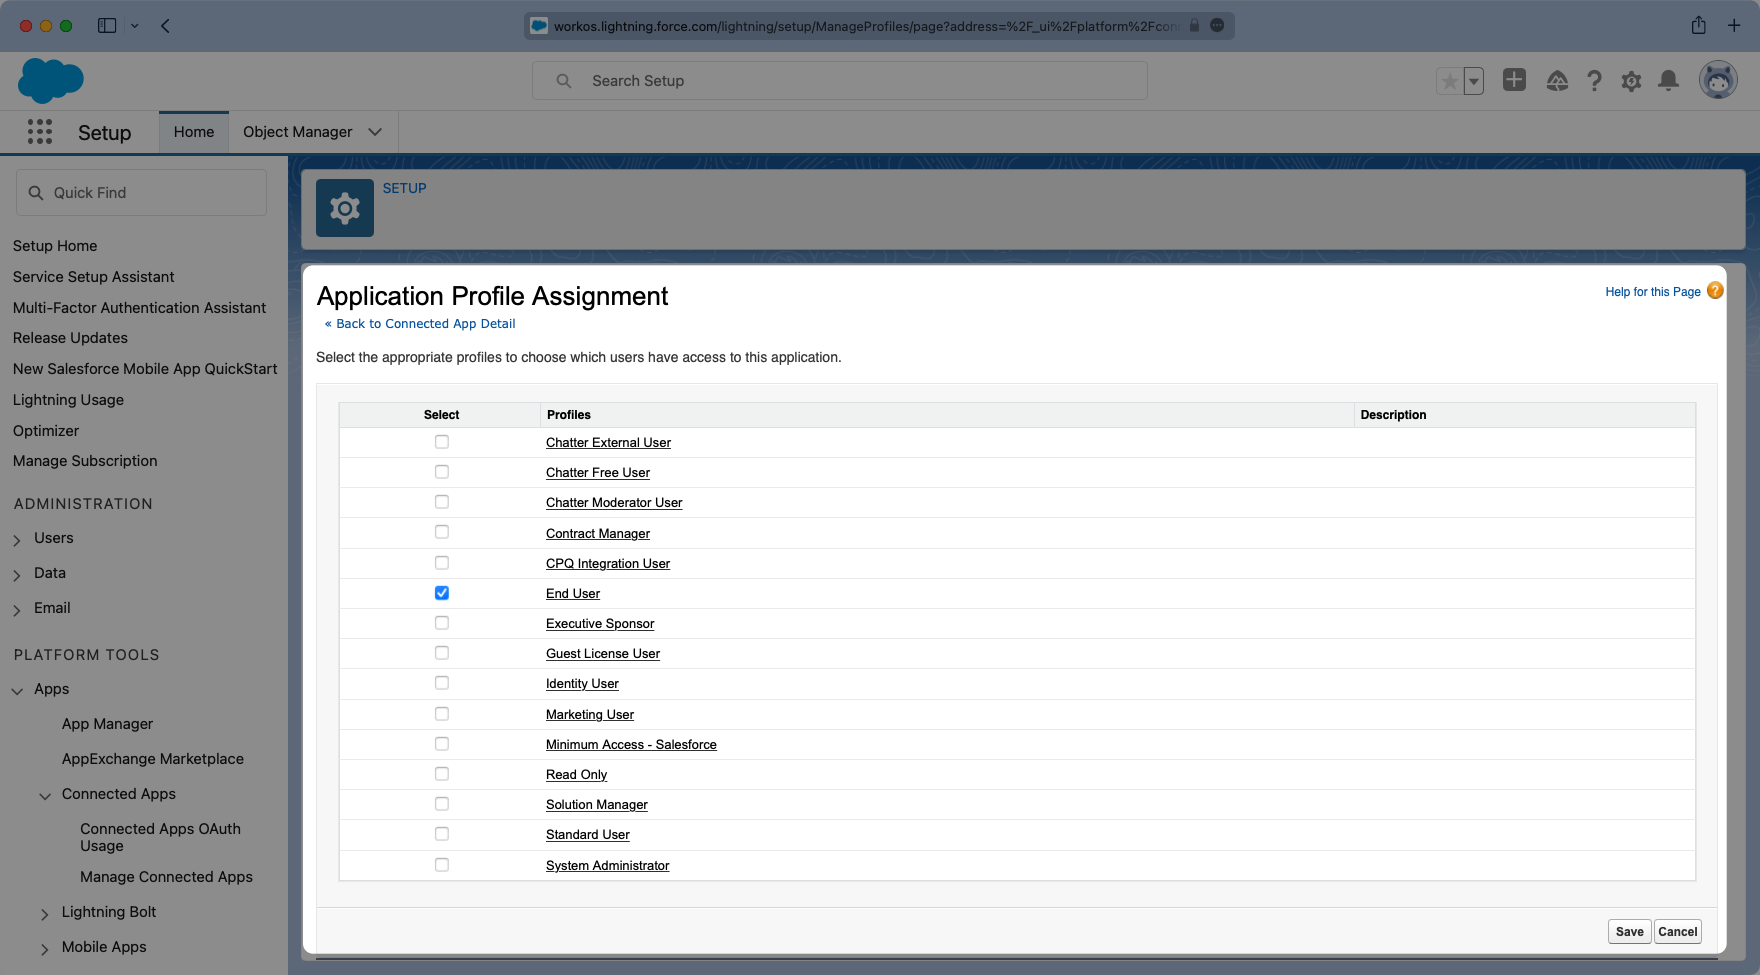 A screenshot showing how to configure the "Application Profile Assignments" in the Salesforce dashboard.